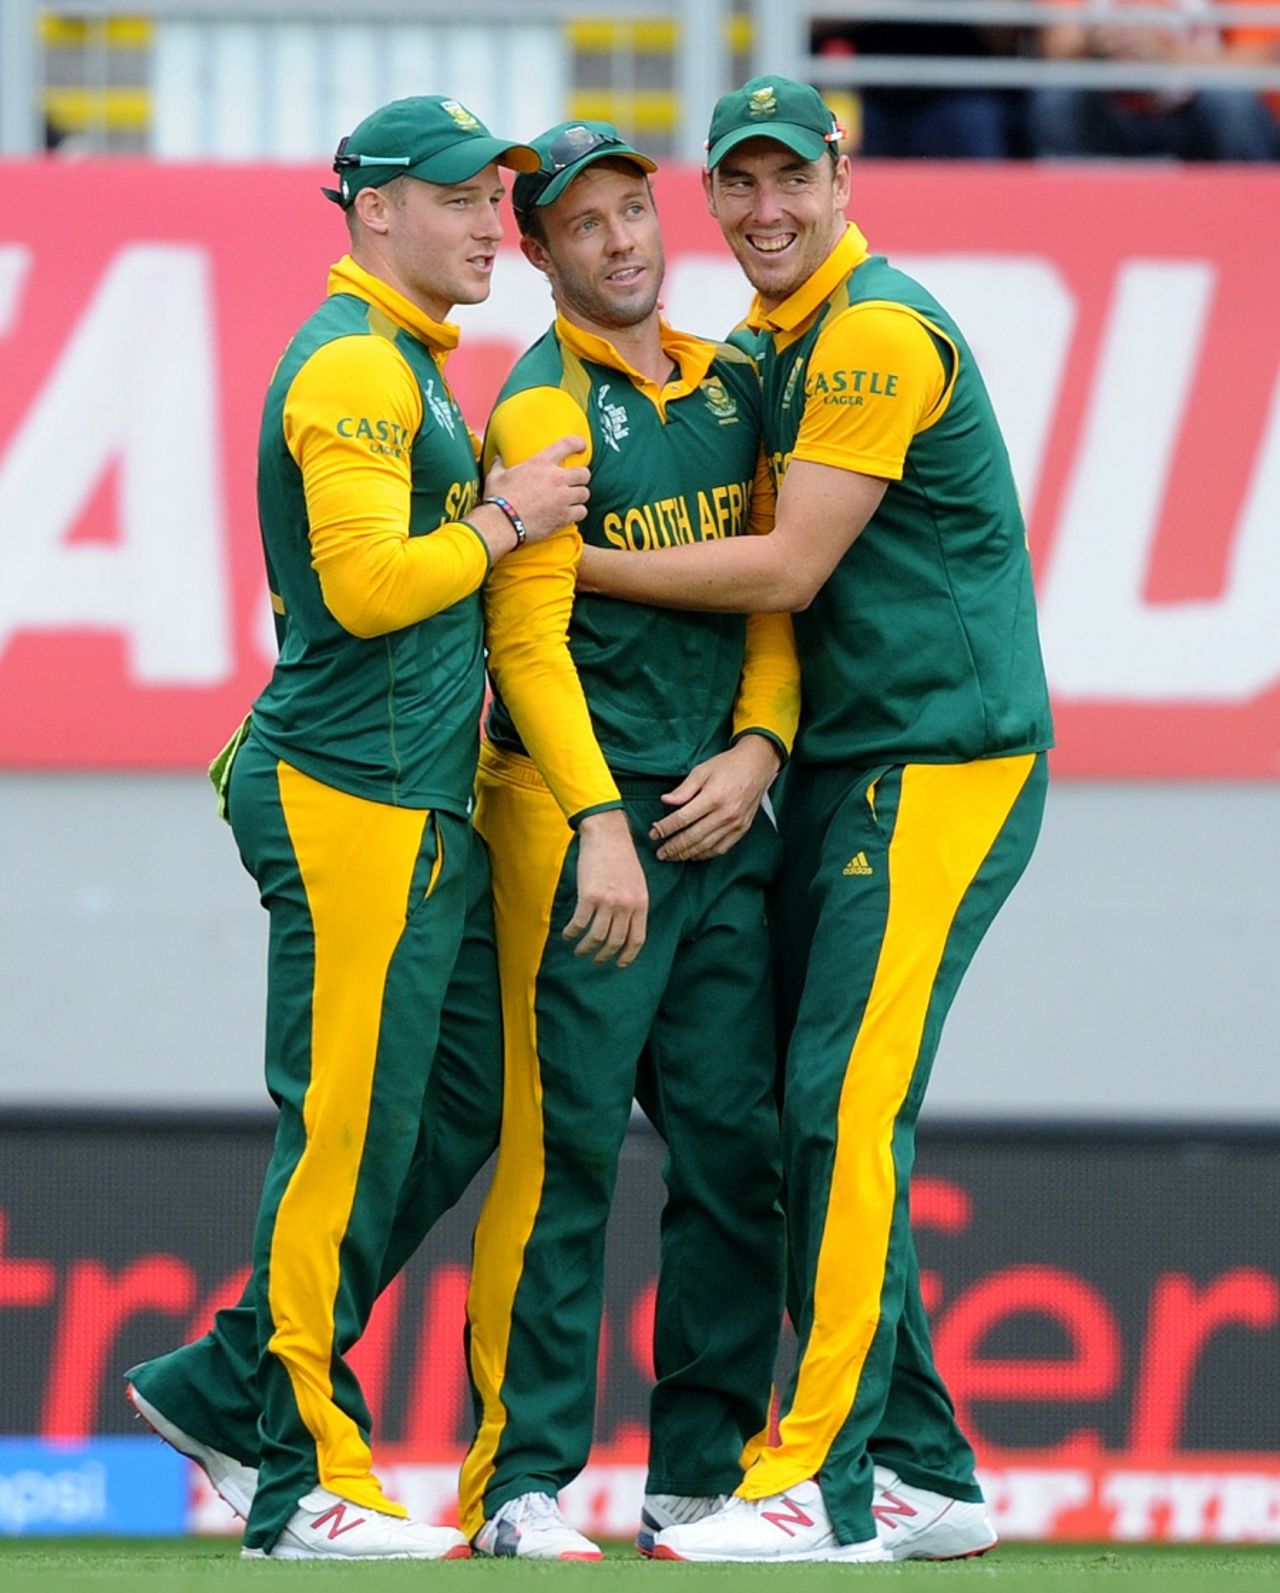 AB de Villiers is flanked by David Miller and Kyle Abbott after taking a catch, Pakistan v South Africa, World Cup 2015, Group B, Auckland, March 7, 2015